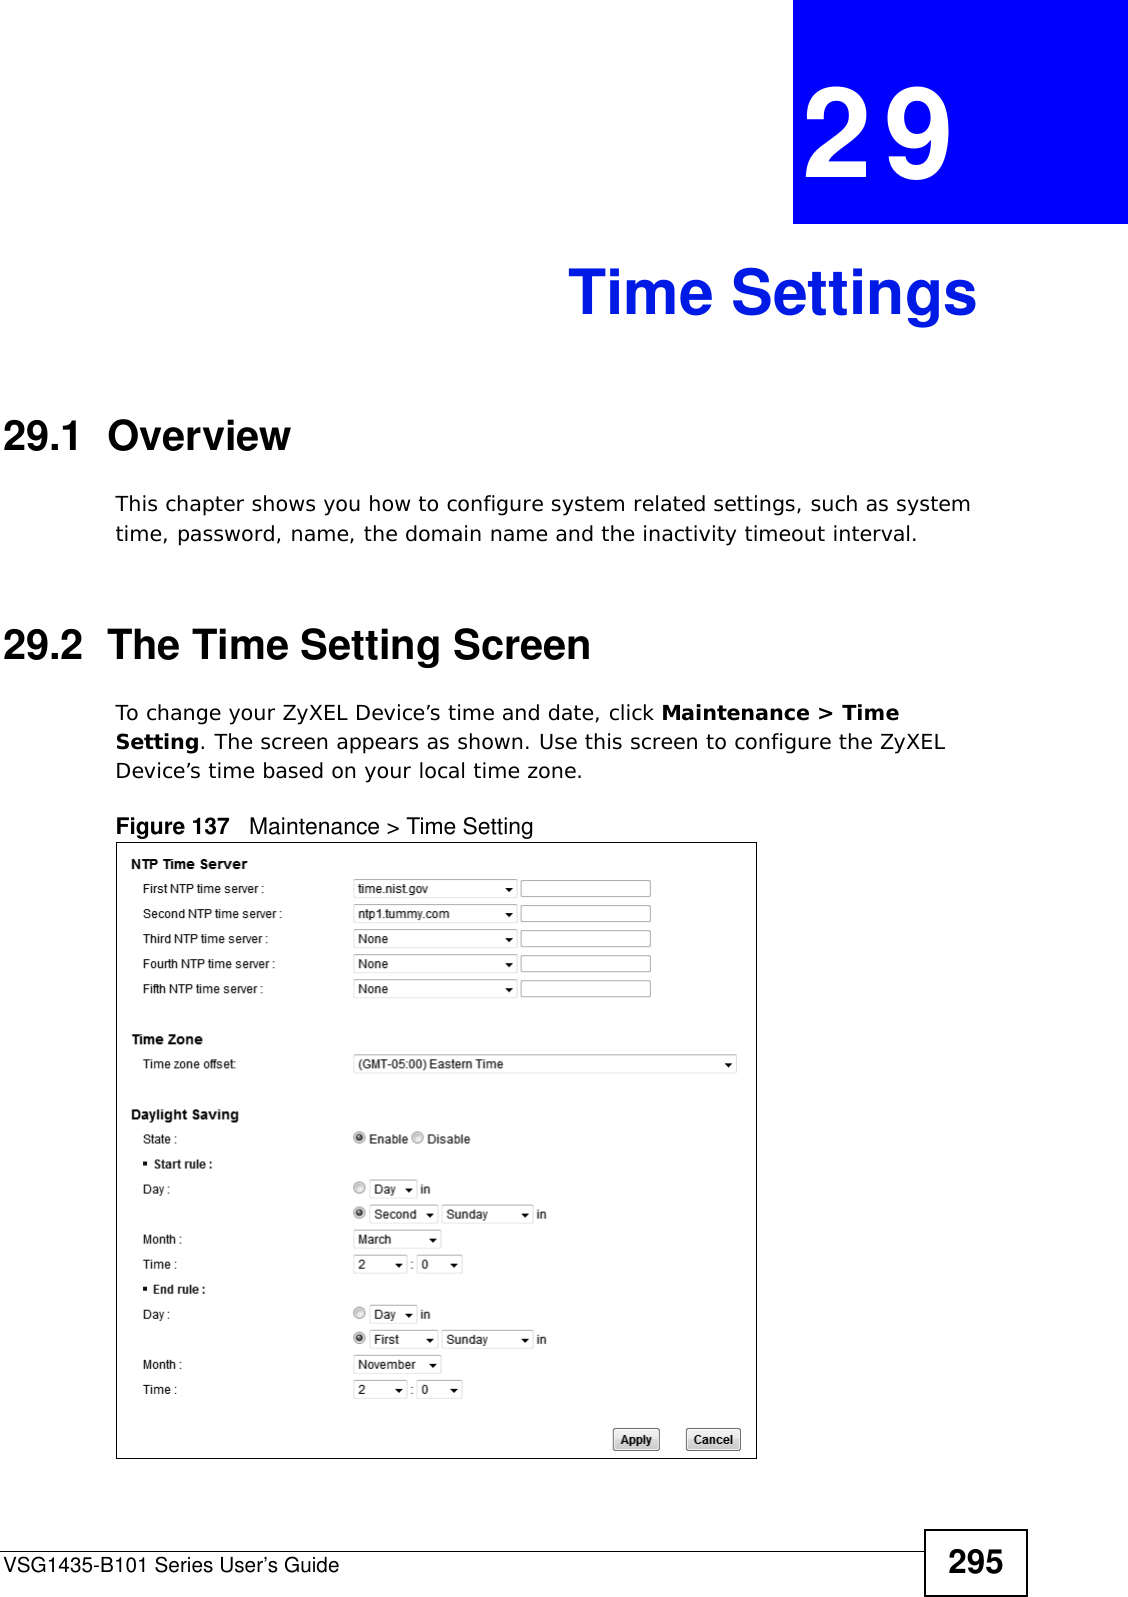 VSG1435-B101 Series User’s Guide 295CHAPTER  29 Time Settings29.1  OverviewThis chapter shows you how to configure system related settings, such as system time, password, name, the domain name and the inactivity timeout interval.    29.2  The Time Setting Screen To change your ZyXEL Device’s time and date, click Maintenance &gt; Time Setting. The screen appears as shown. Use this screen to configure the ZyXEL Device’s time based on your local time zone.Figure 137   Maintenance &gt; Time Setting